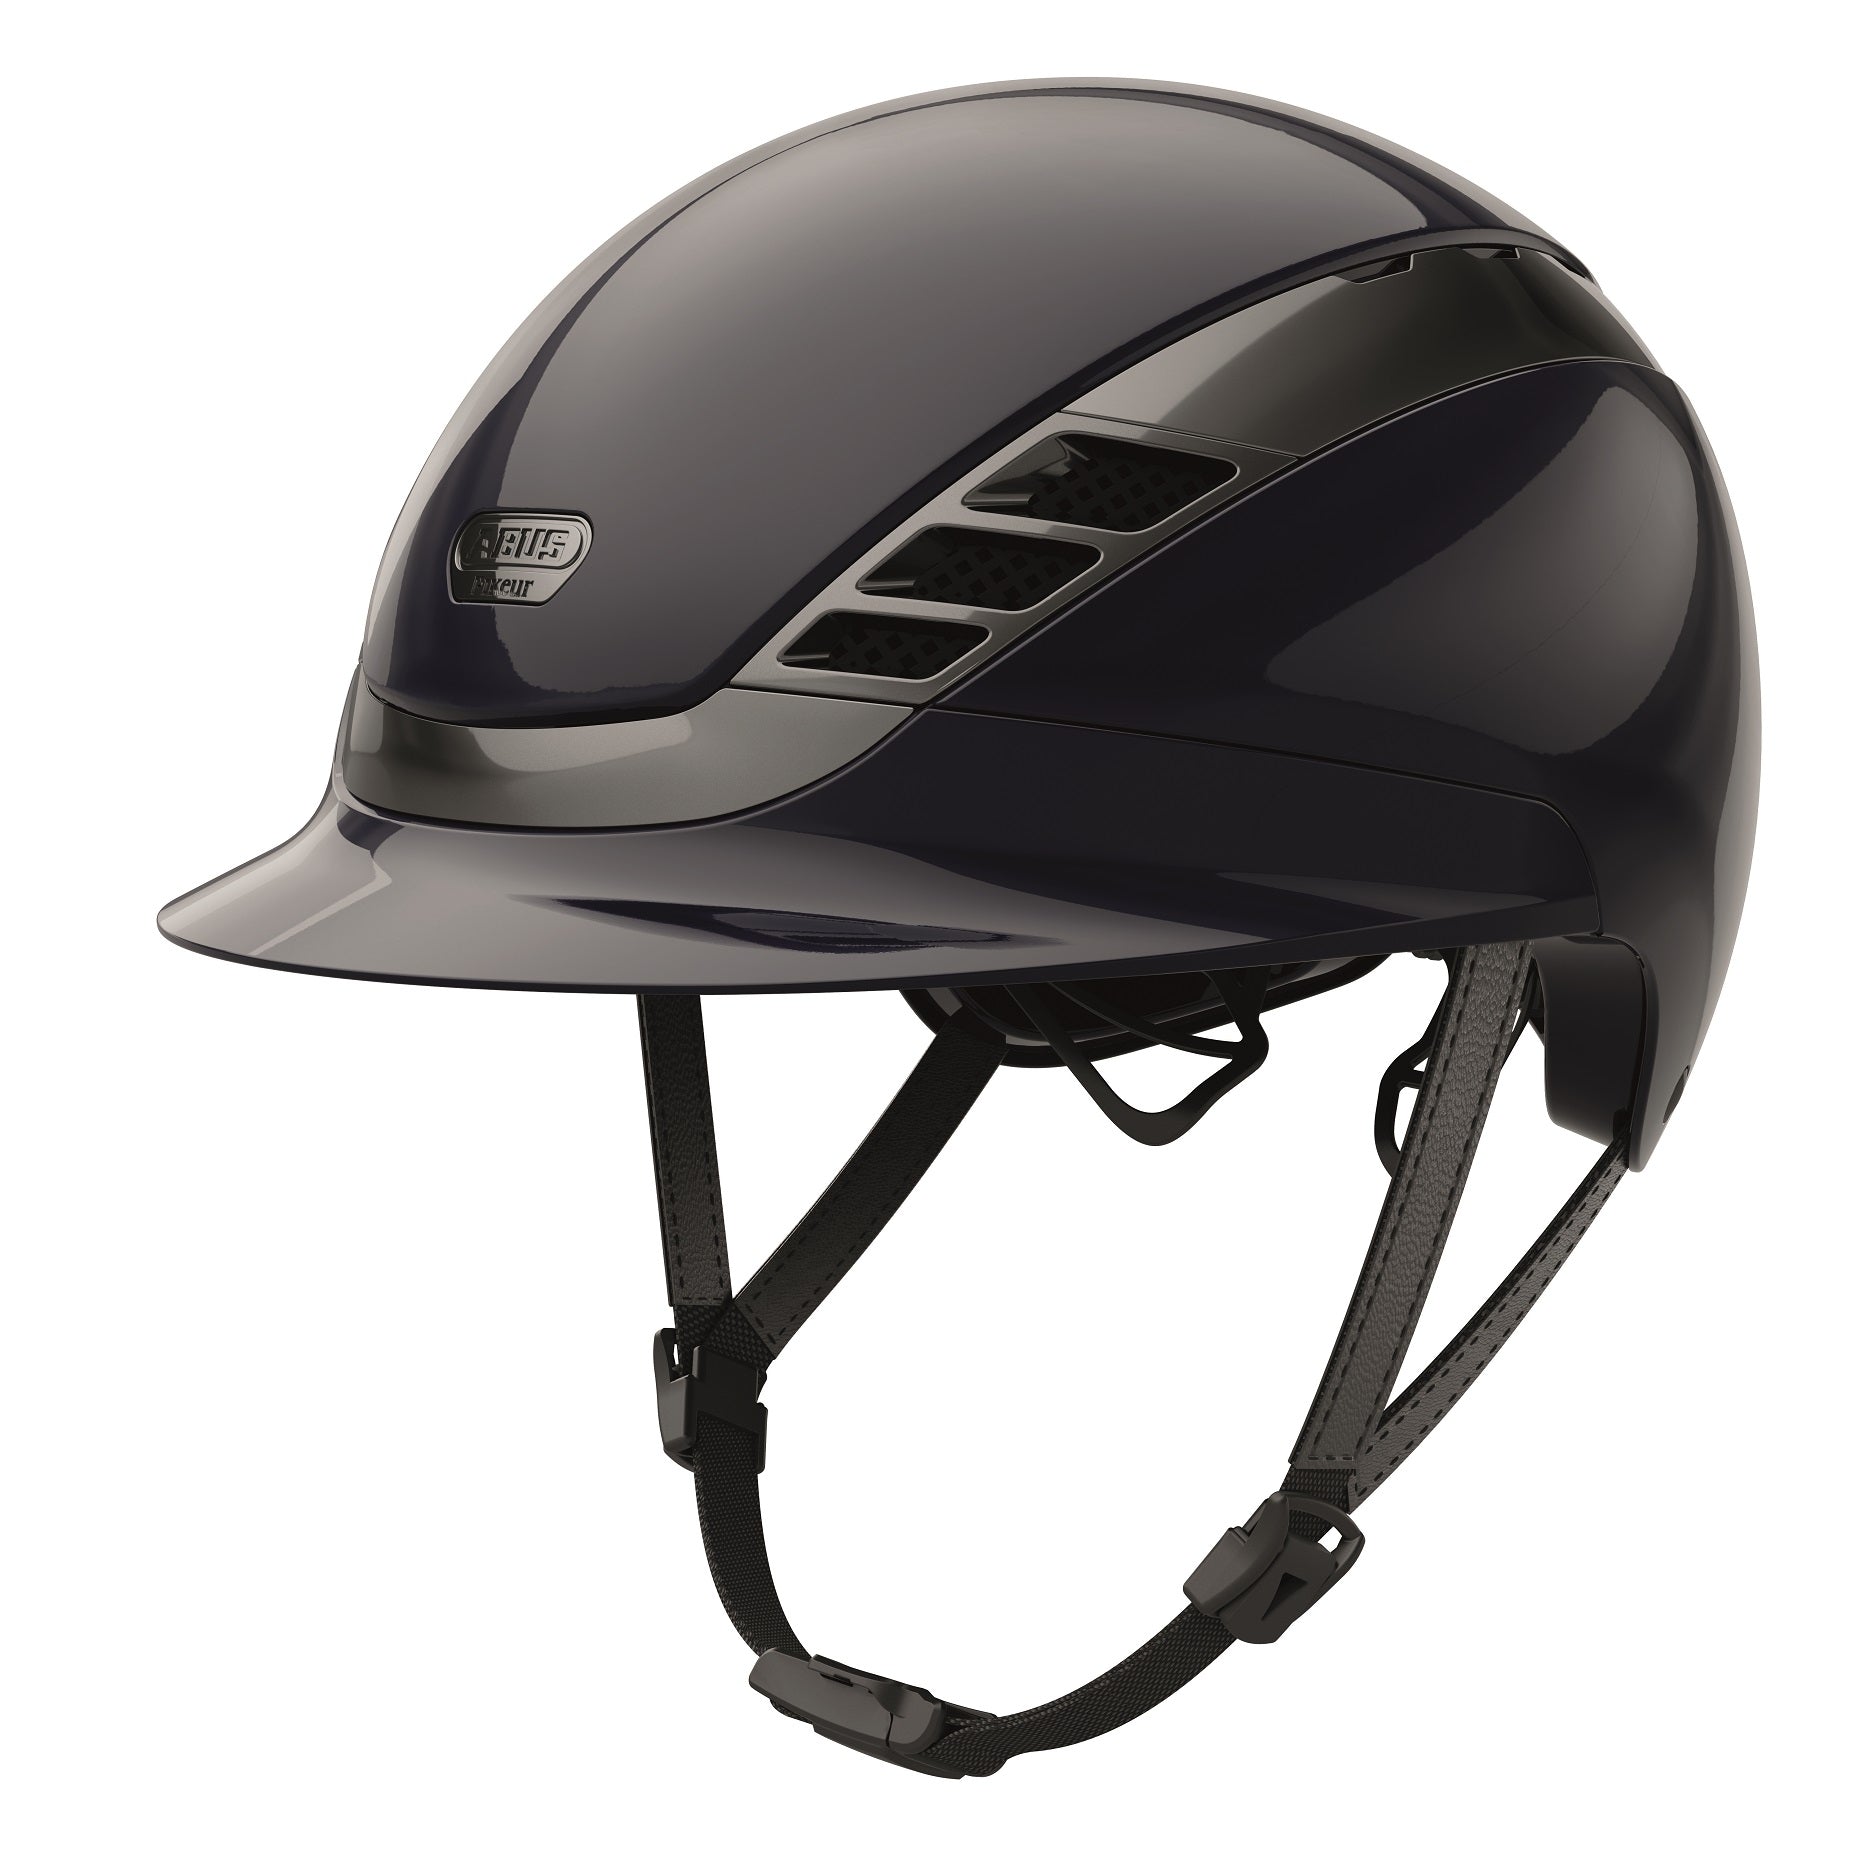 Abus AirLuxe Chrome Riding Helmet - due October